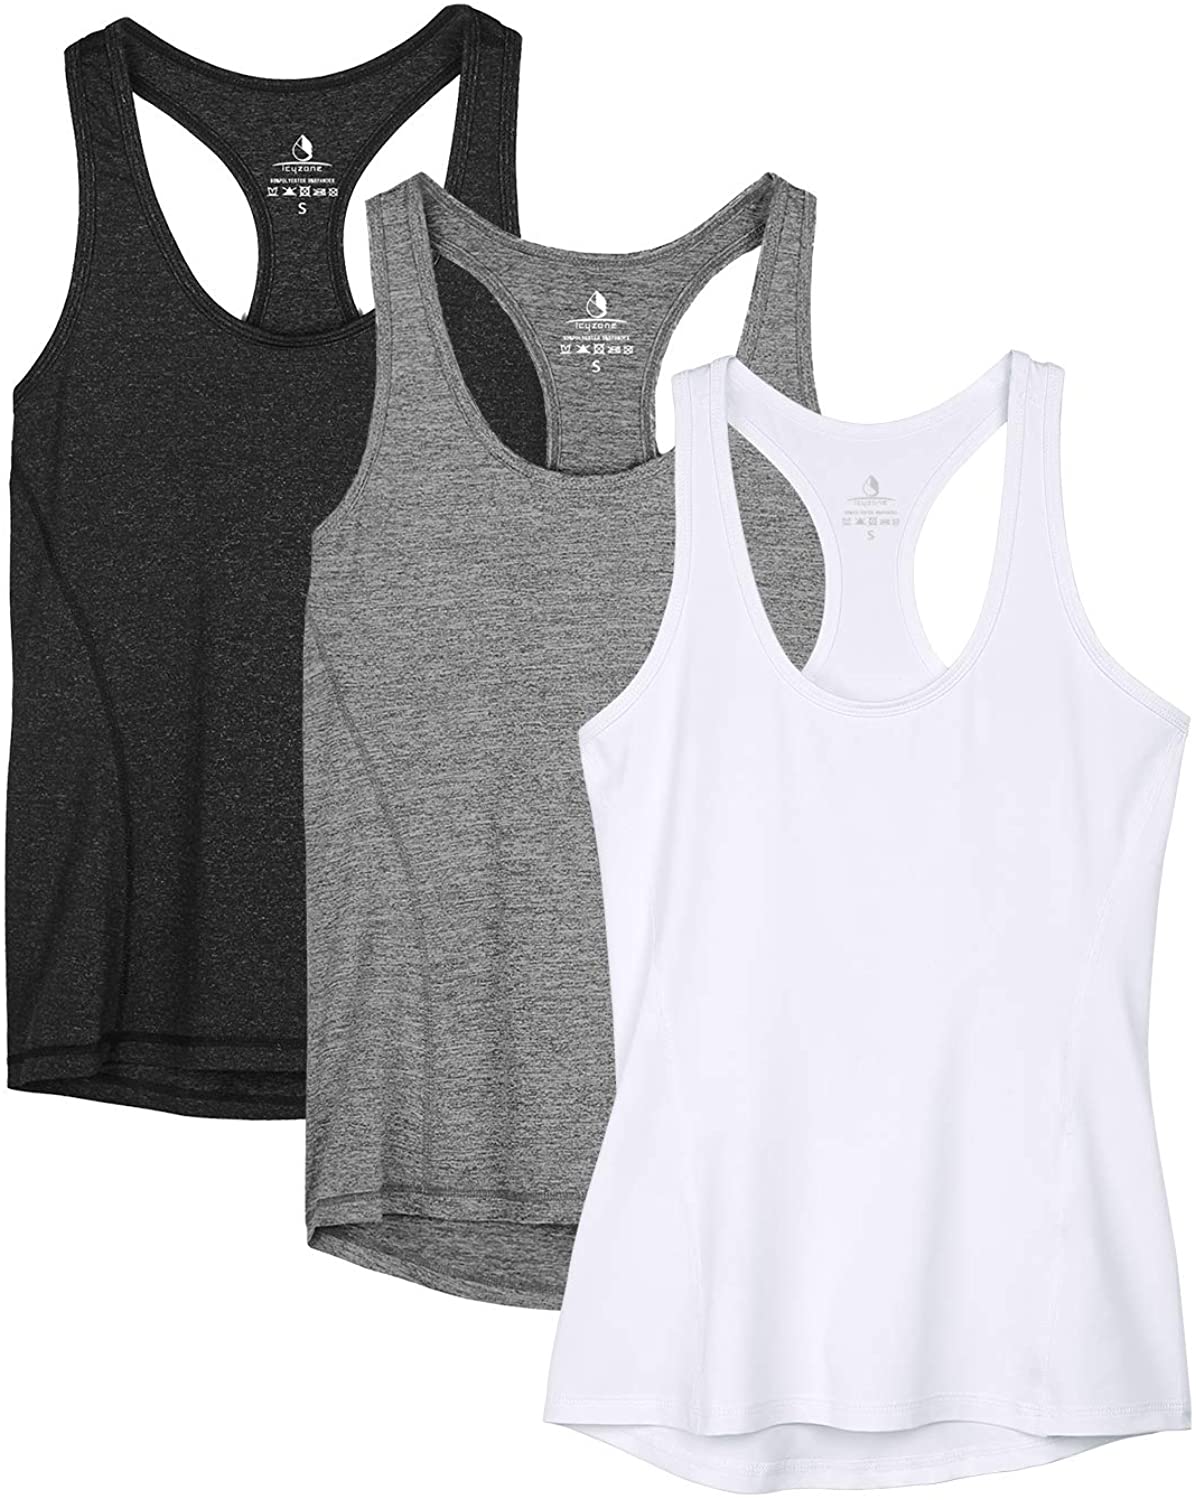 Buy icyzone Women's Racerback Workout Athletic Running Tank Tops